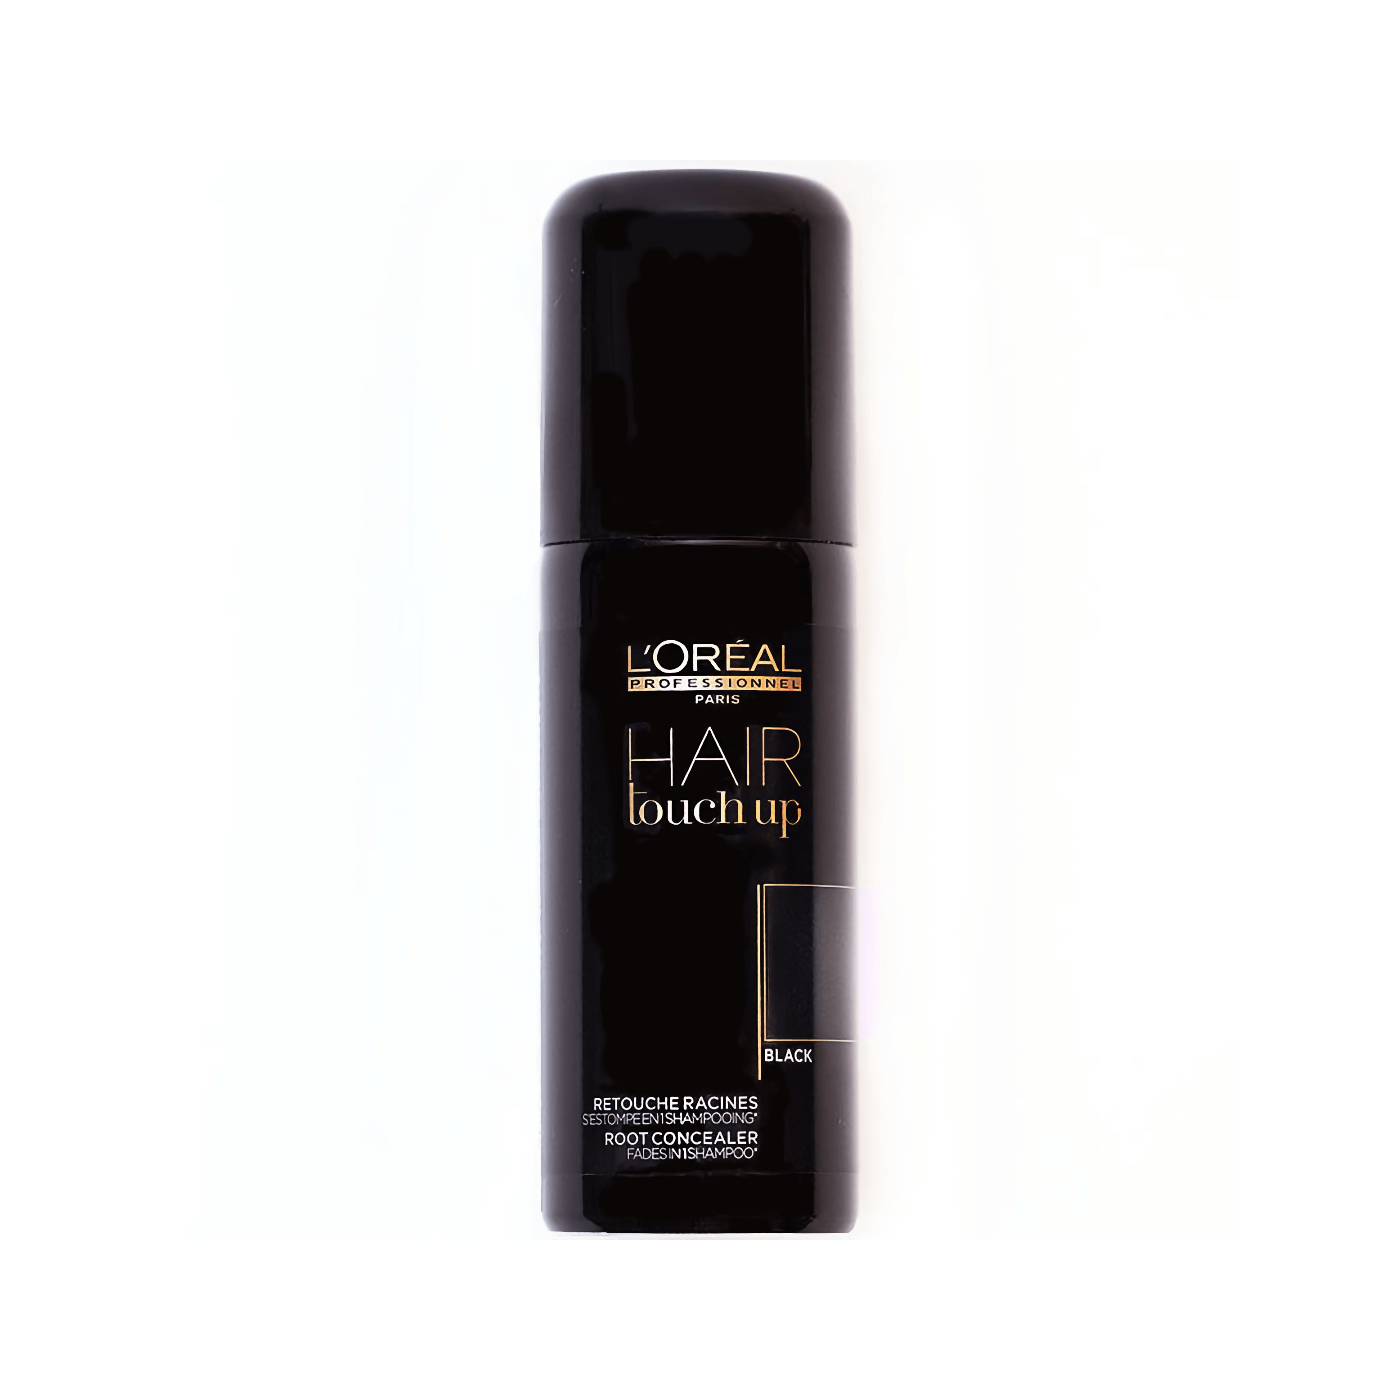 L'Oreal L'Oreal Hair Touch Up 75ml Black